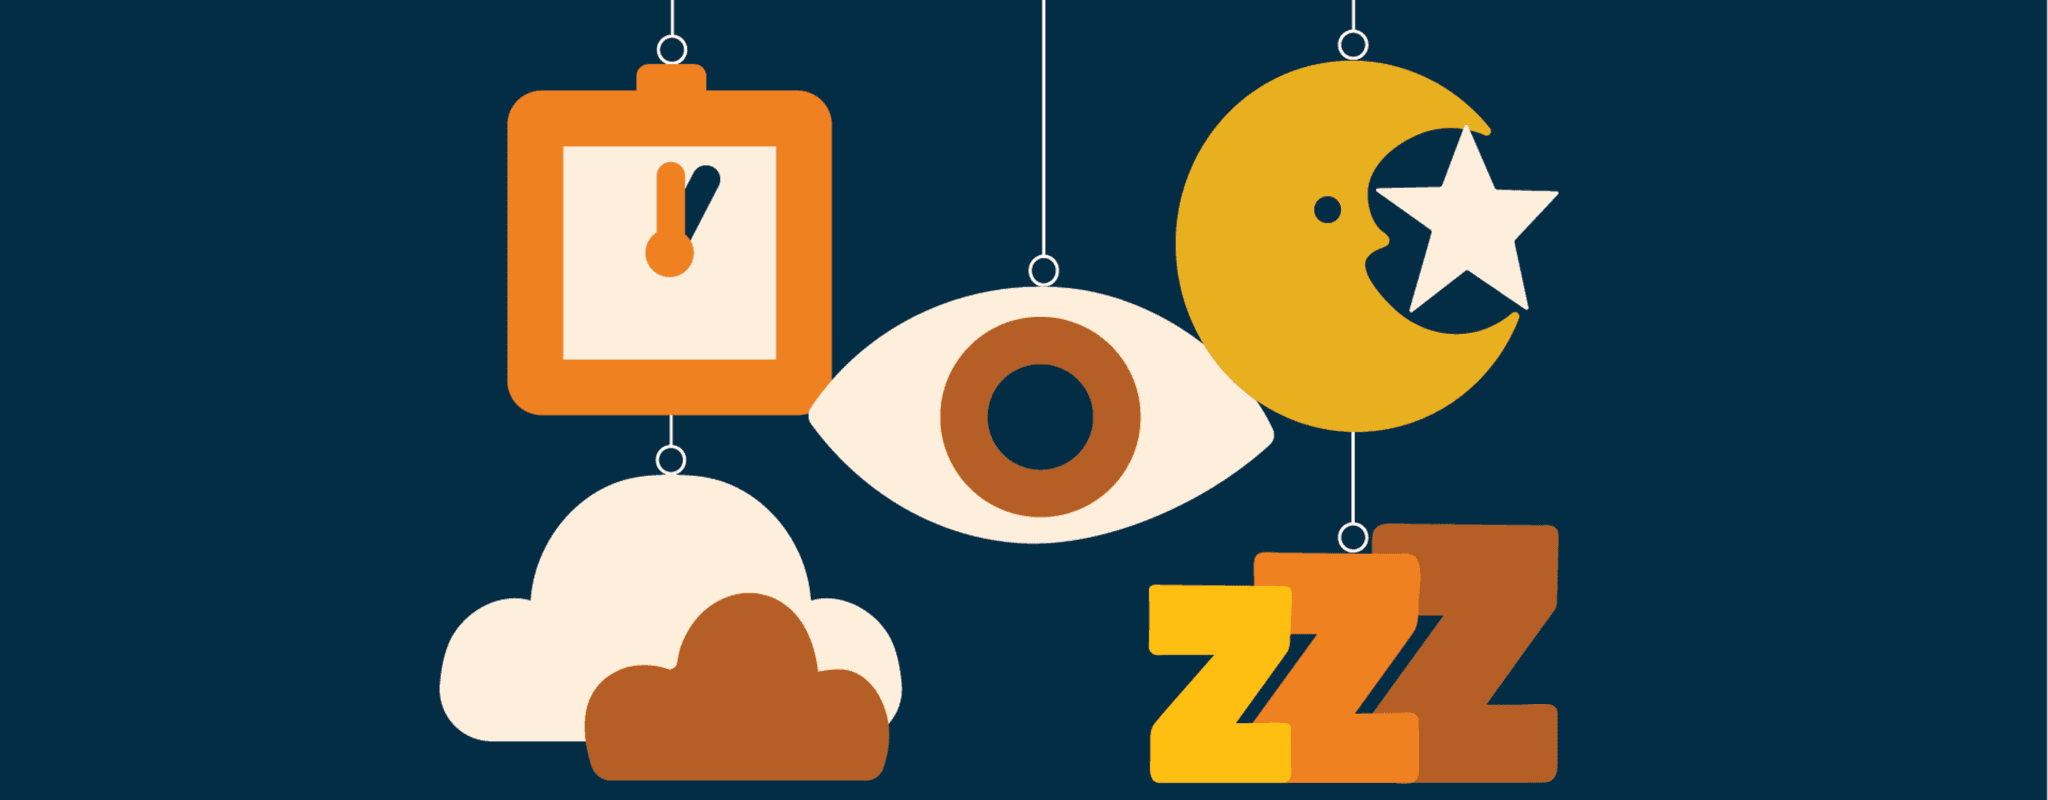 Illustration shows a clock, cloud, eye, moon, and stars to represent sleep and mental health